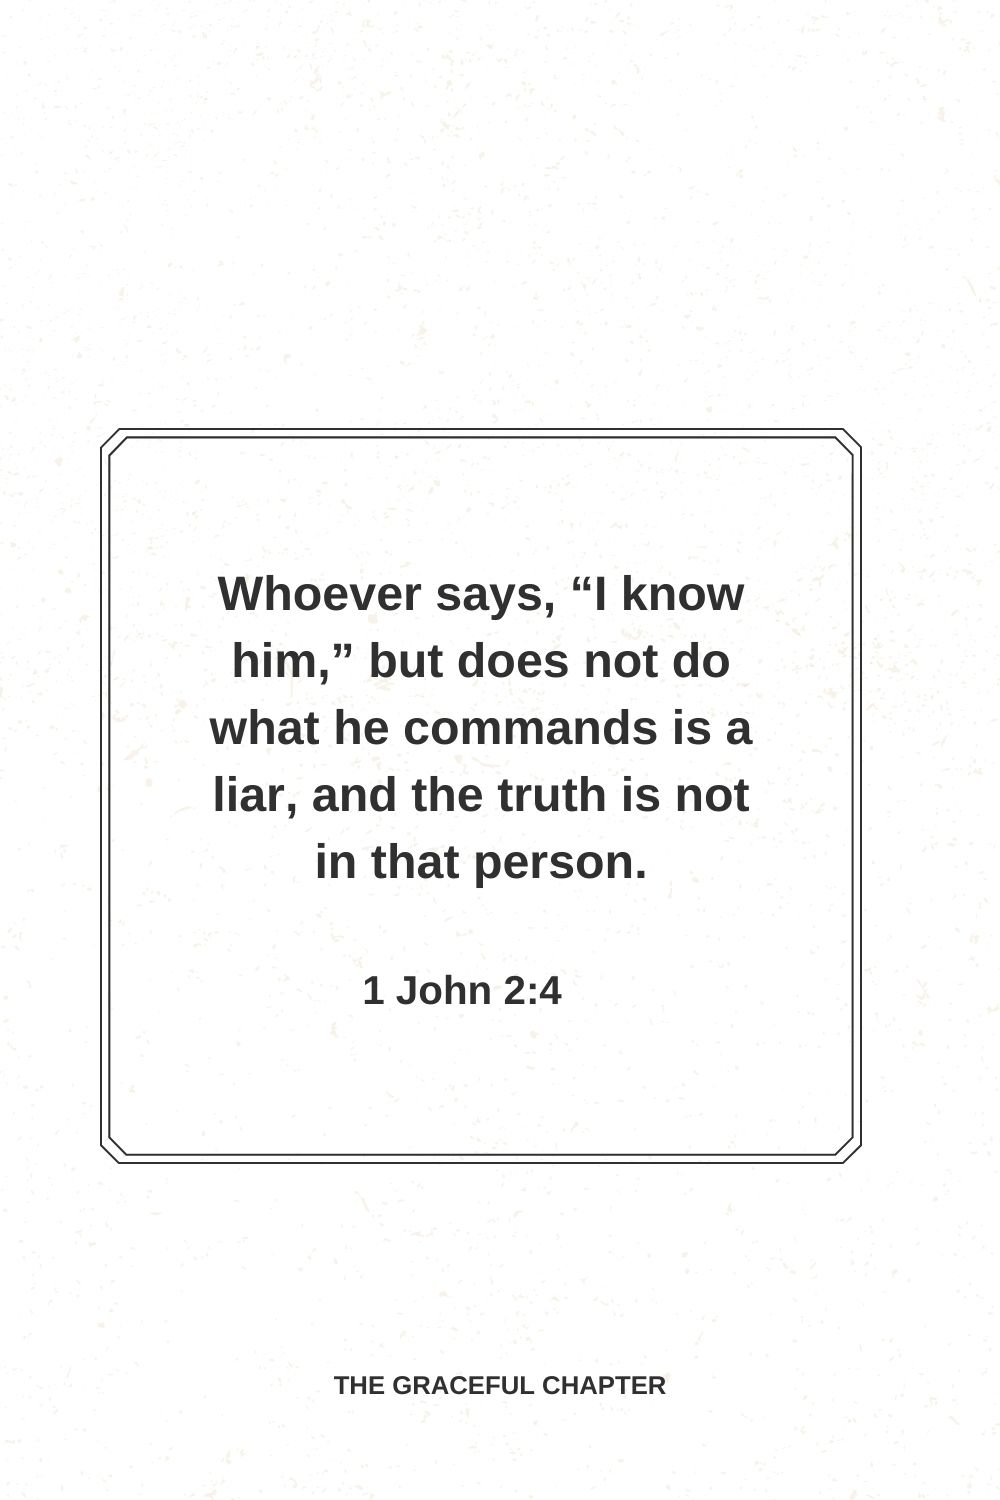 Whoever says, “I know him,” but does not do what he commands is a liar, and the truth is not in that person. 1 John 2:4